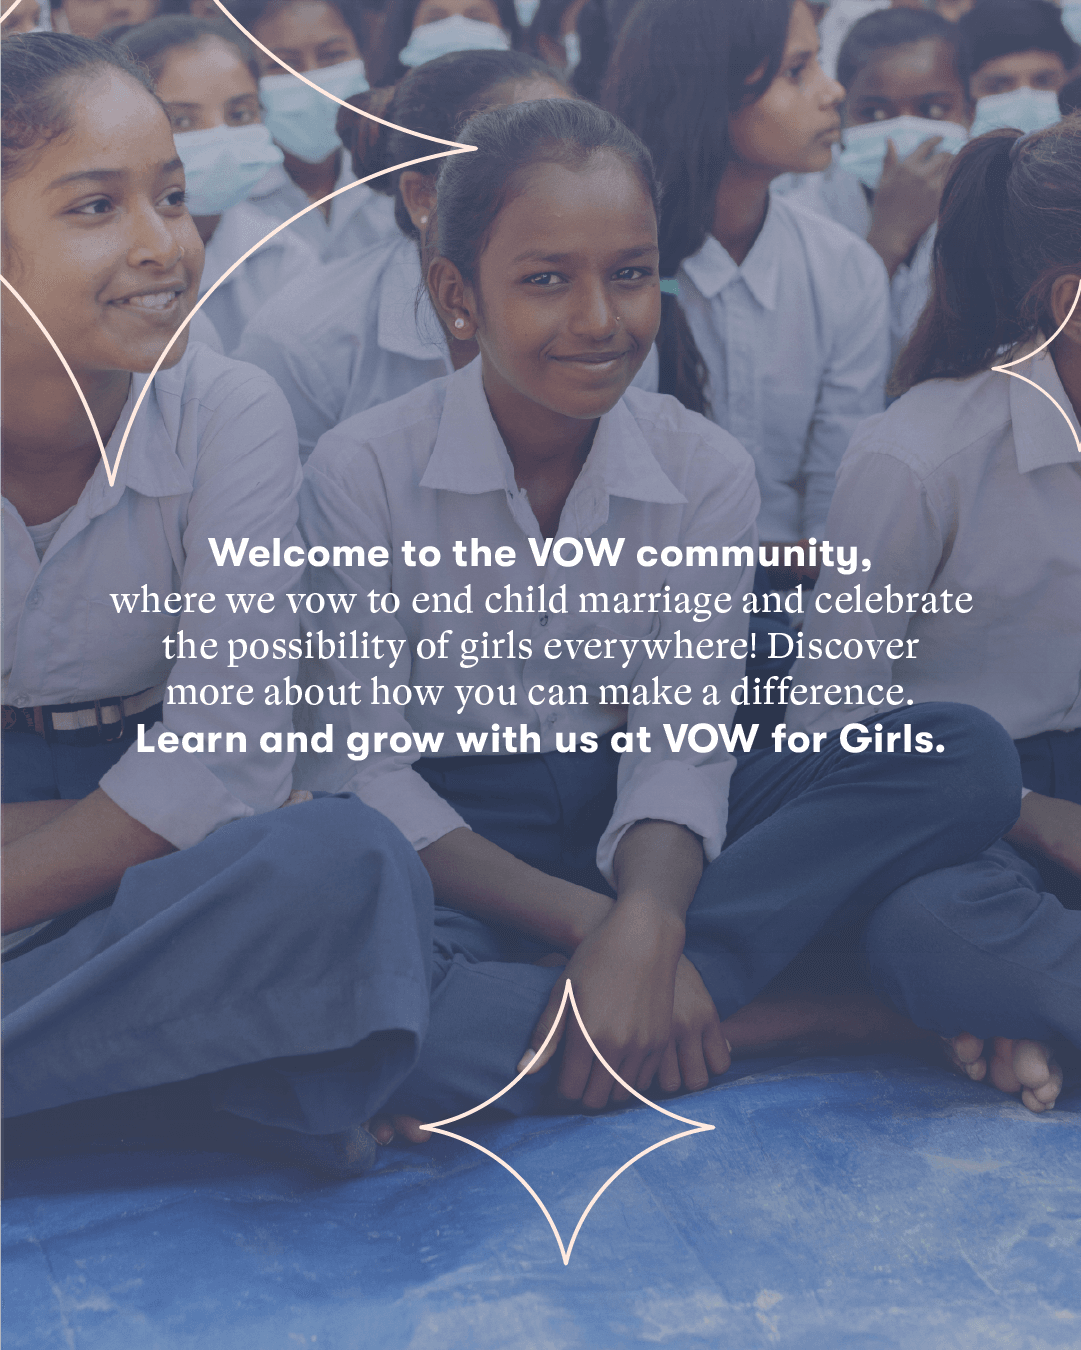 VOW for Girls - Change the world through your wedding